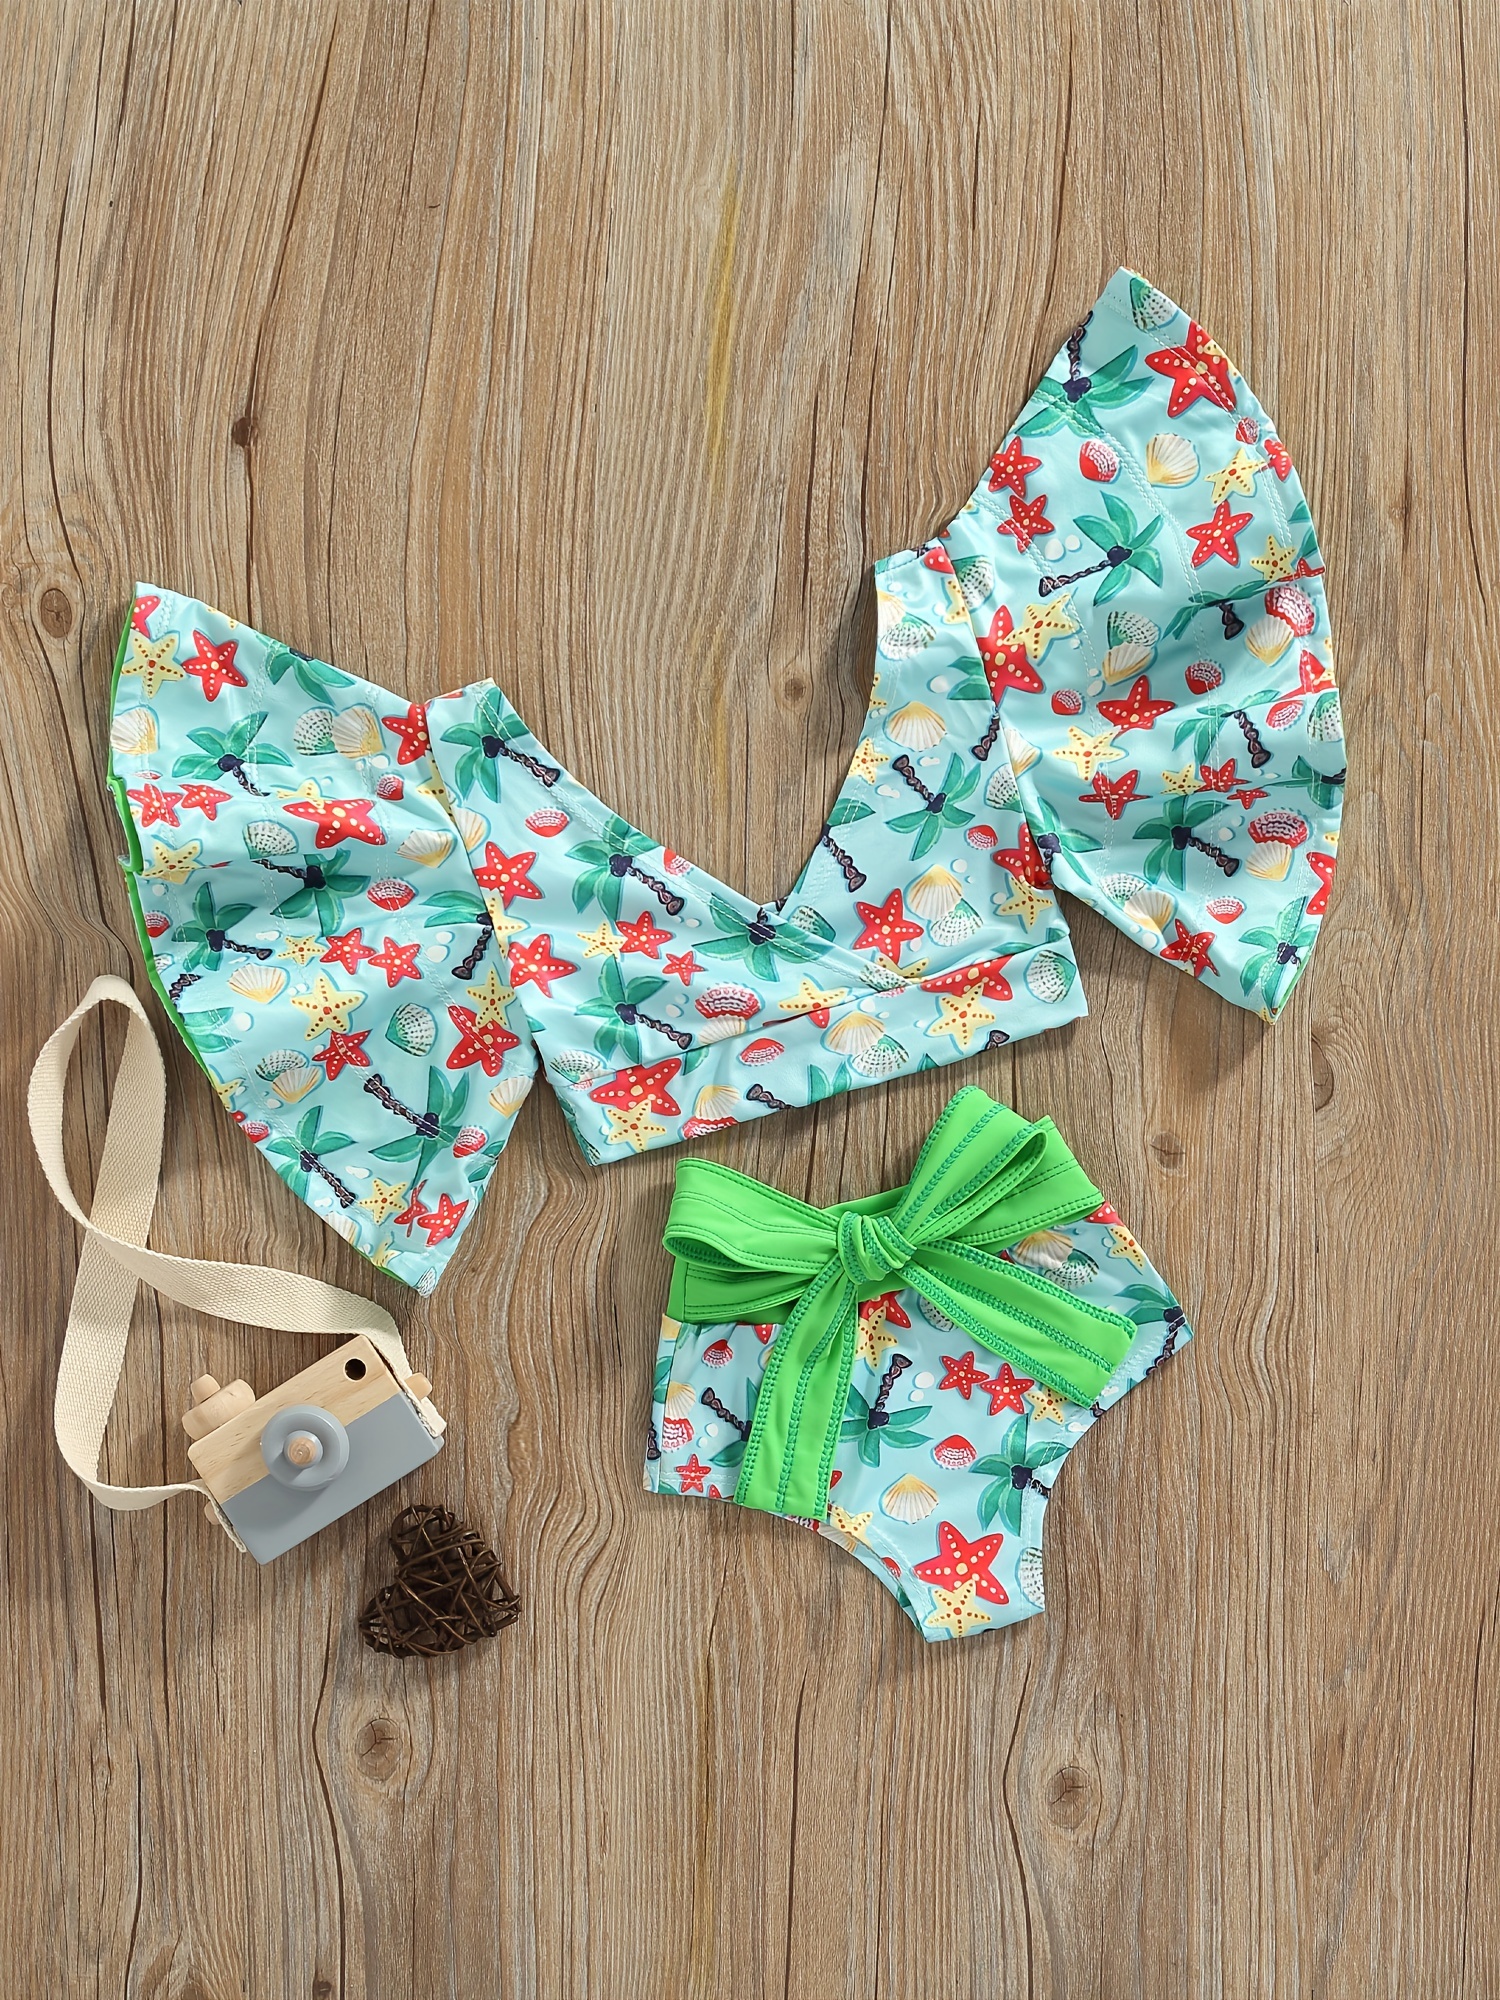 Kawaii Two-Piece Swimsuit - Blue Bunny Pattern Halter Top and Bowknot  Bottoms Swimwear Bathing Suit